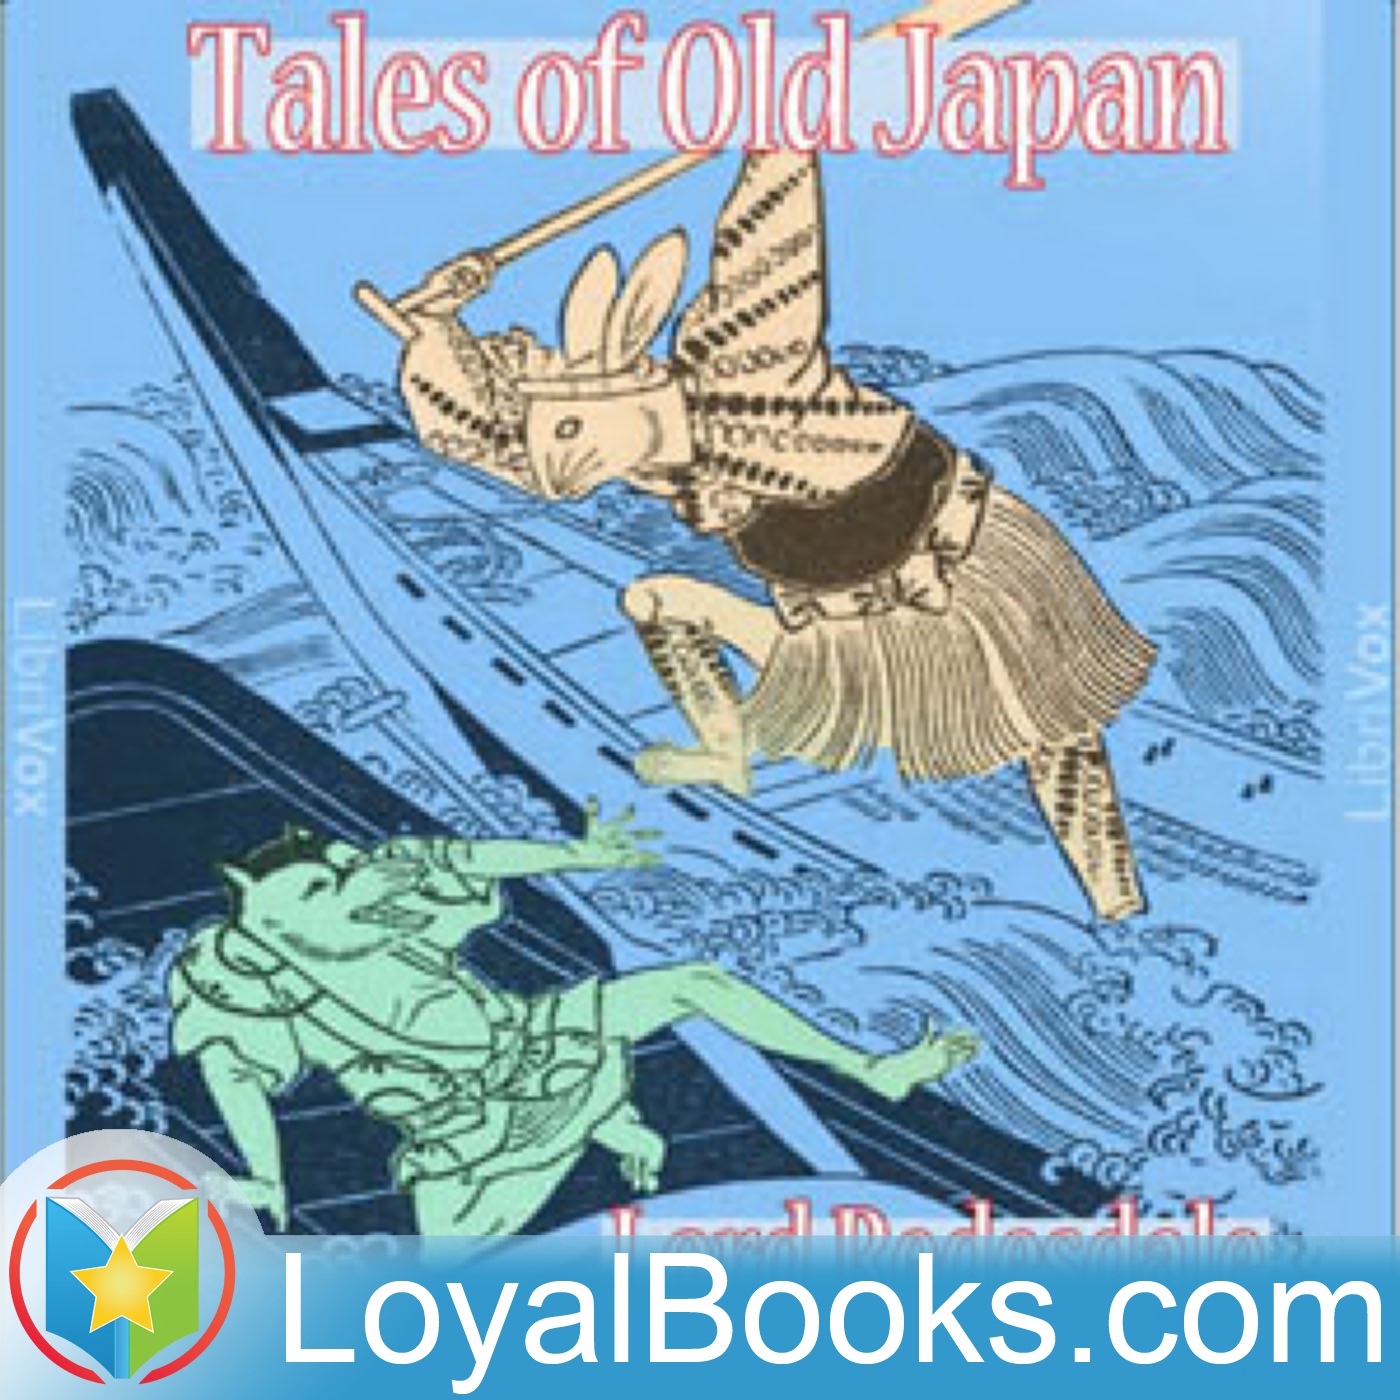 Tales of Old Japan by Lord Redesdale:Loyal Books